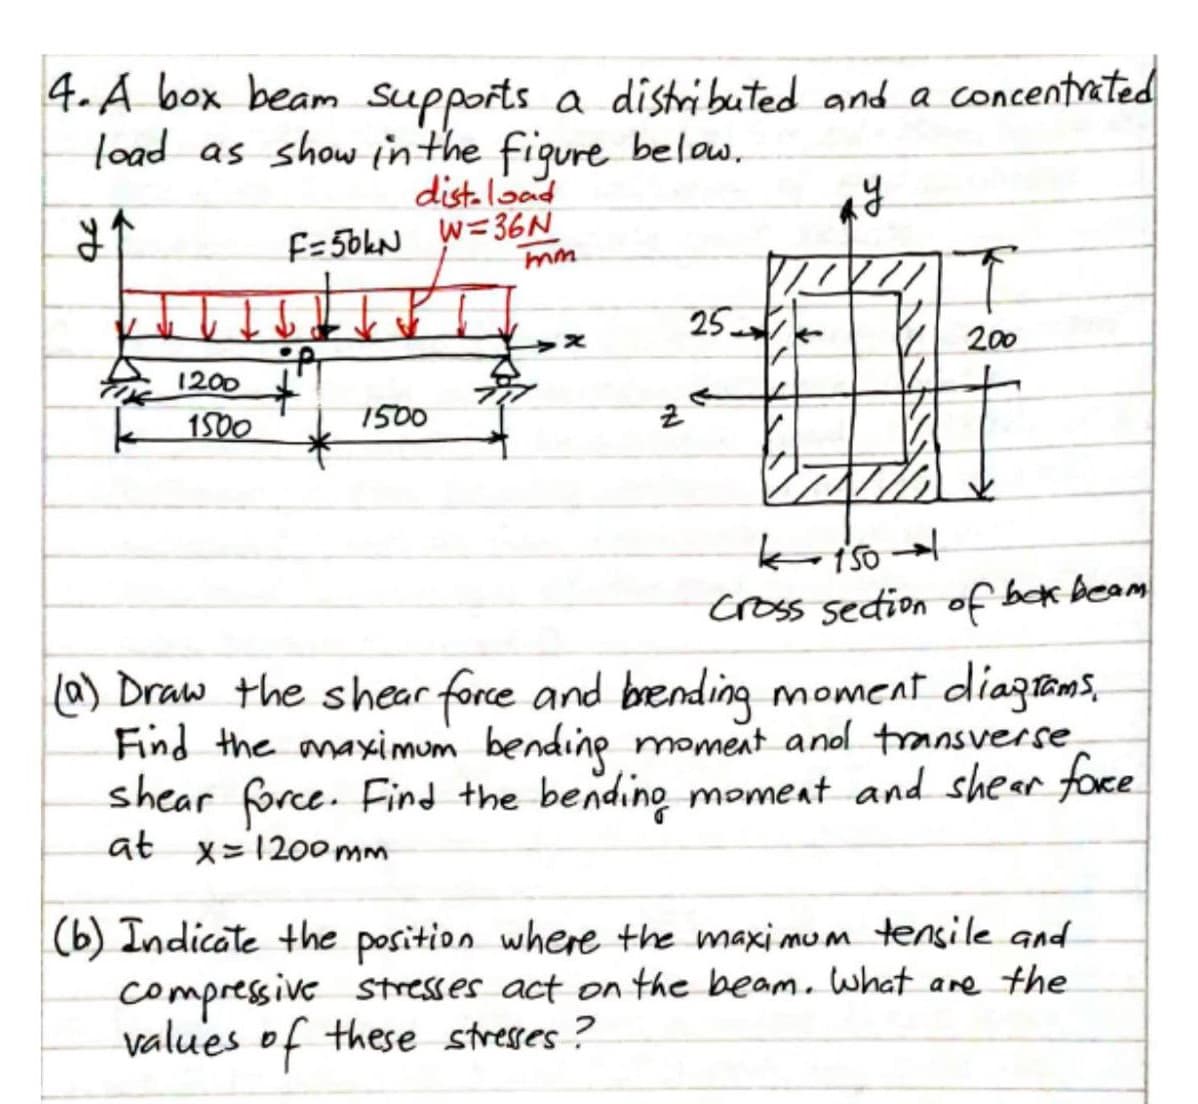 4. A box beam Supports a distributed and a concentrated
load as show inthe figure below,
dist.load
F=56kN W=36N
25
200
t.
1500
1200
1500
cross sedion of bek beam
(a) Draw the shear force and brending moment diaztams,
Find the anaximum bendine moment anol transverse
shear force. Find the bending moment and shear foce
at x=1200mm
(b) Indicate the position where the maxi mum tensile and
compressive Stresses act on the beam. what are the
values of these stresses ?
